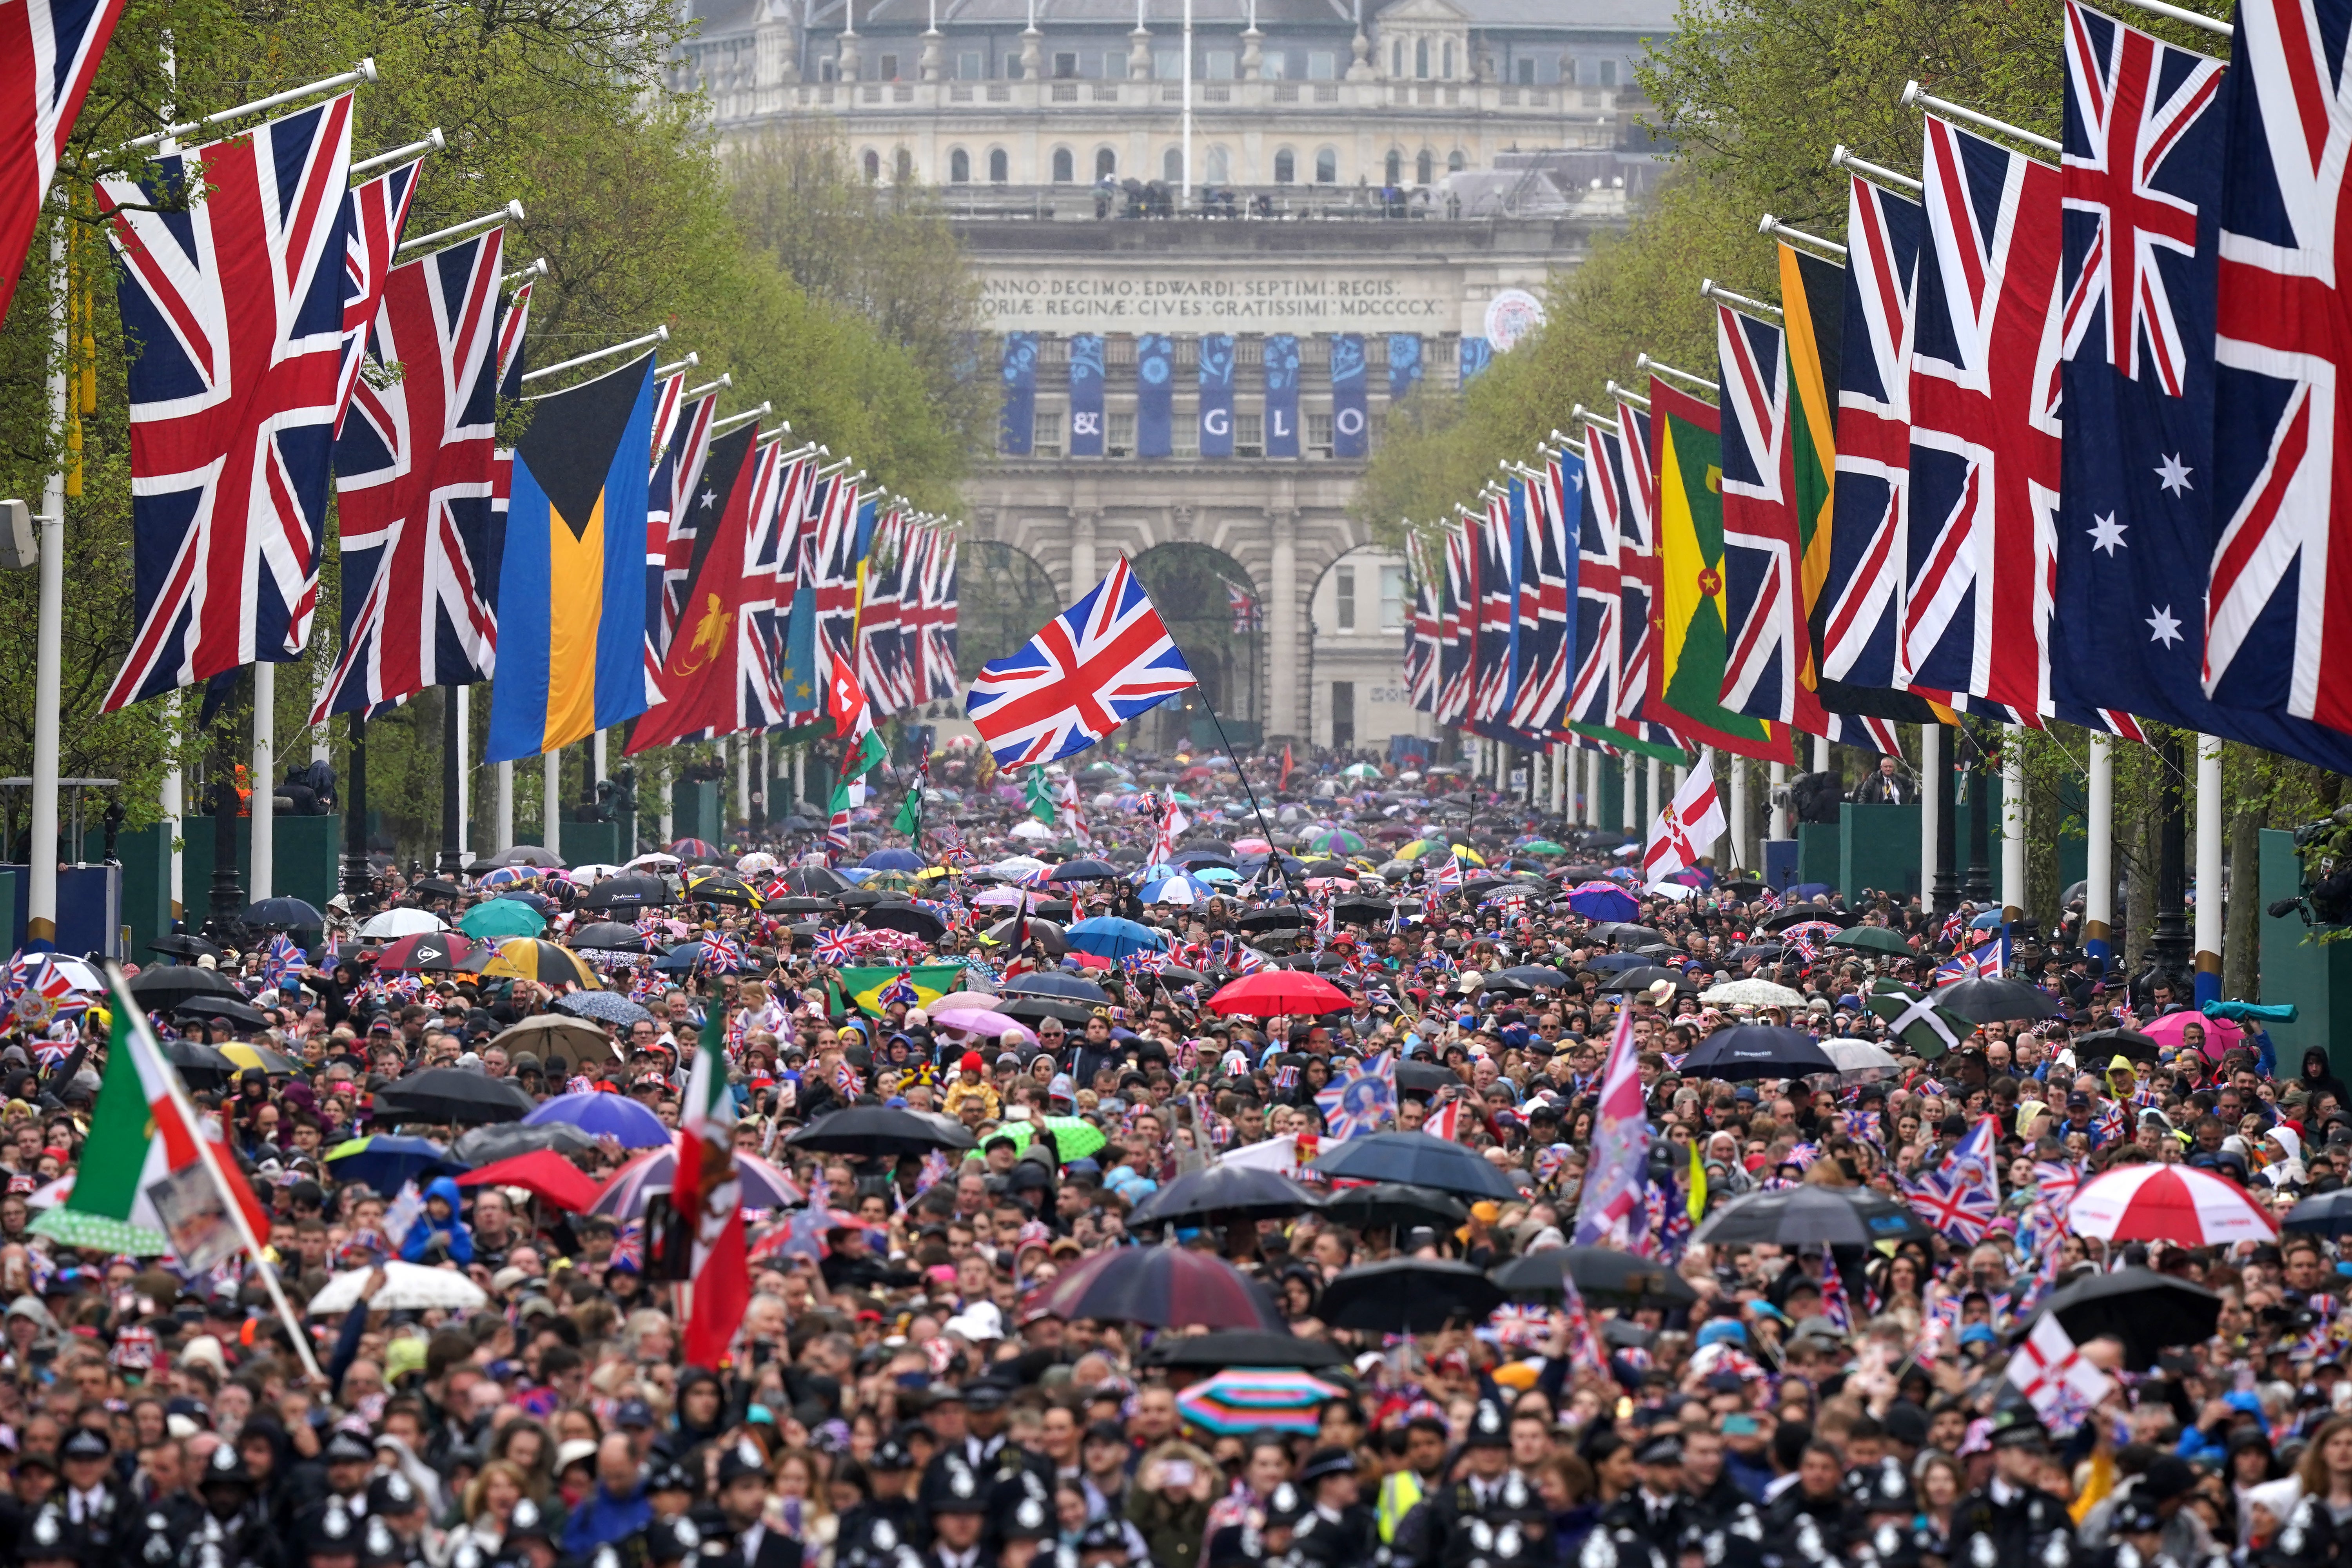 Crowds brave the wet weather on the Mall in central London